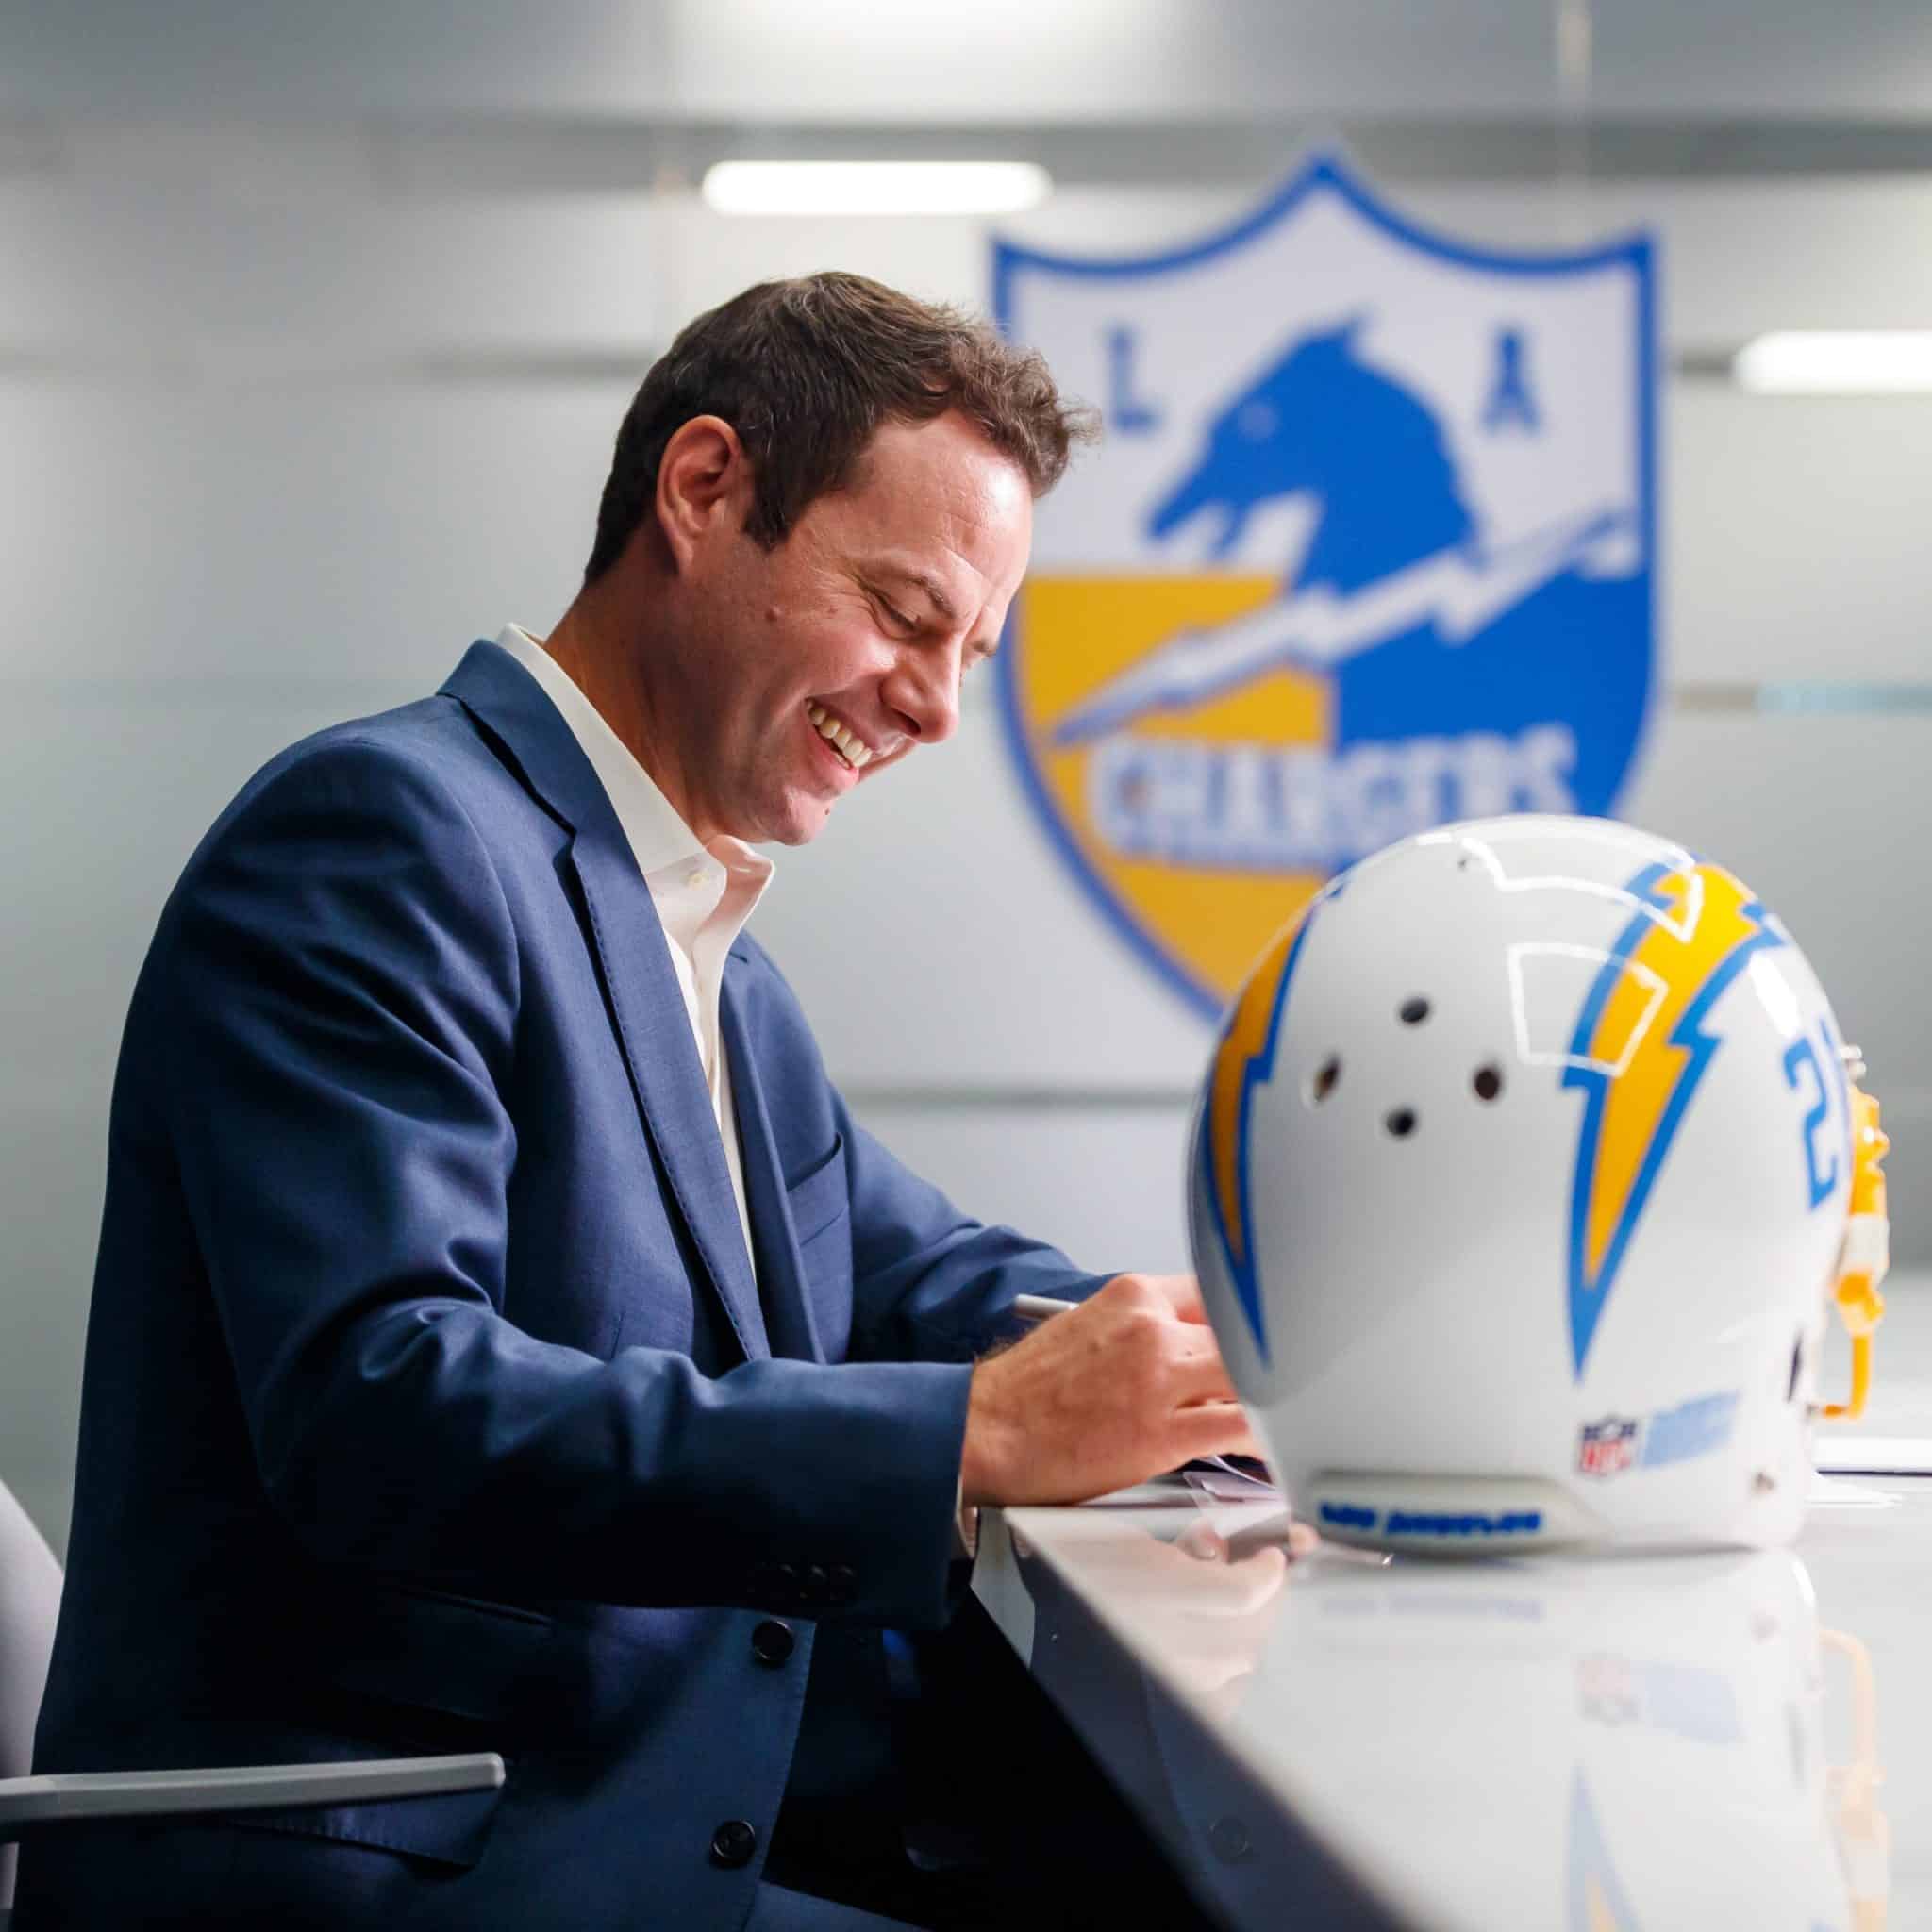 Ty Nowell captures a moment from Brandon Staley's first day in the Chargers facility.